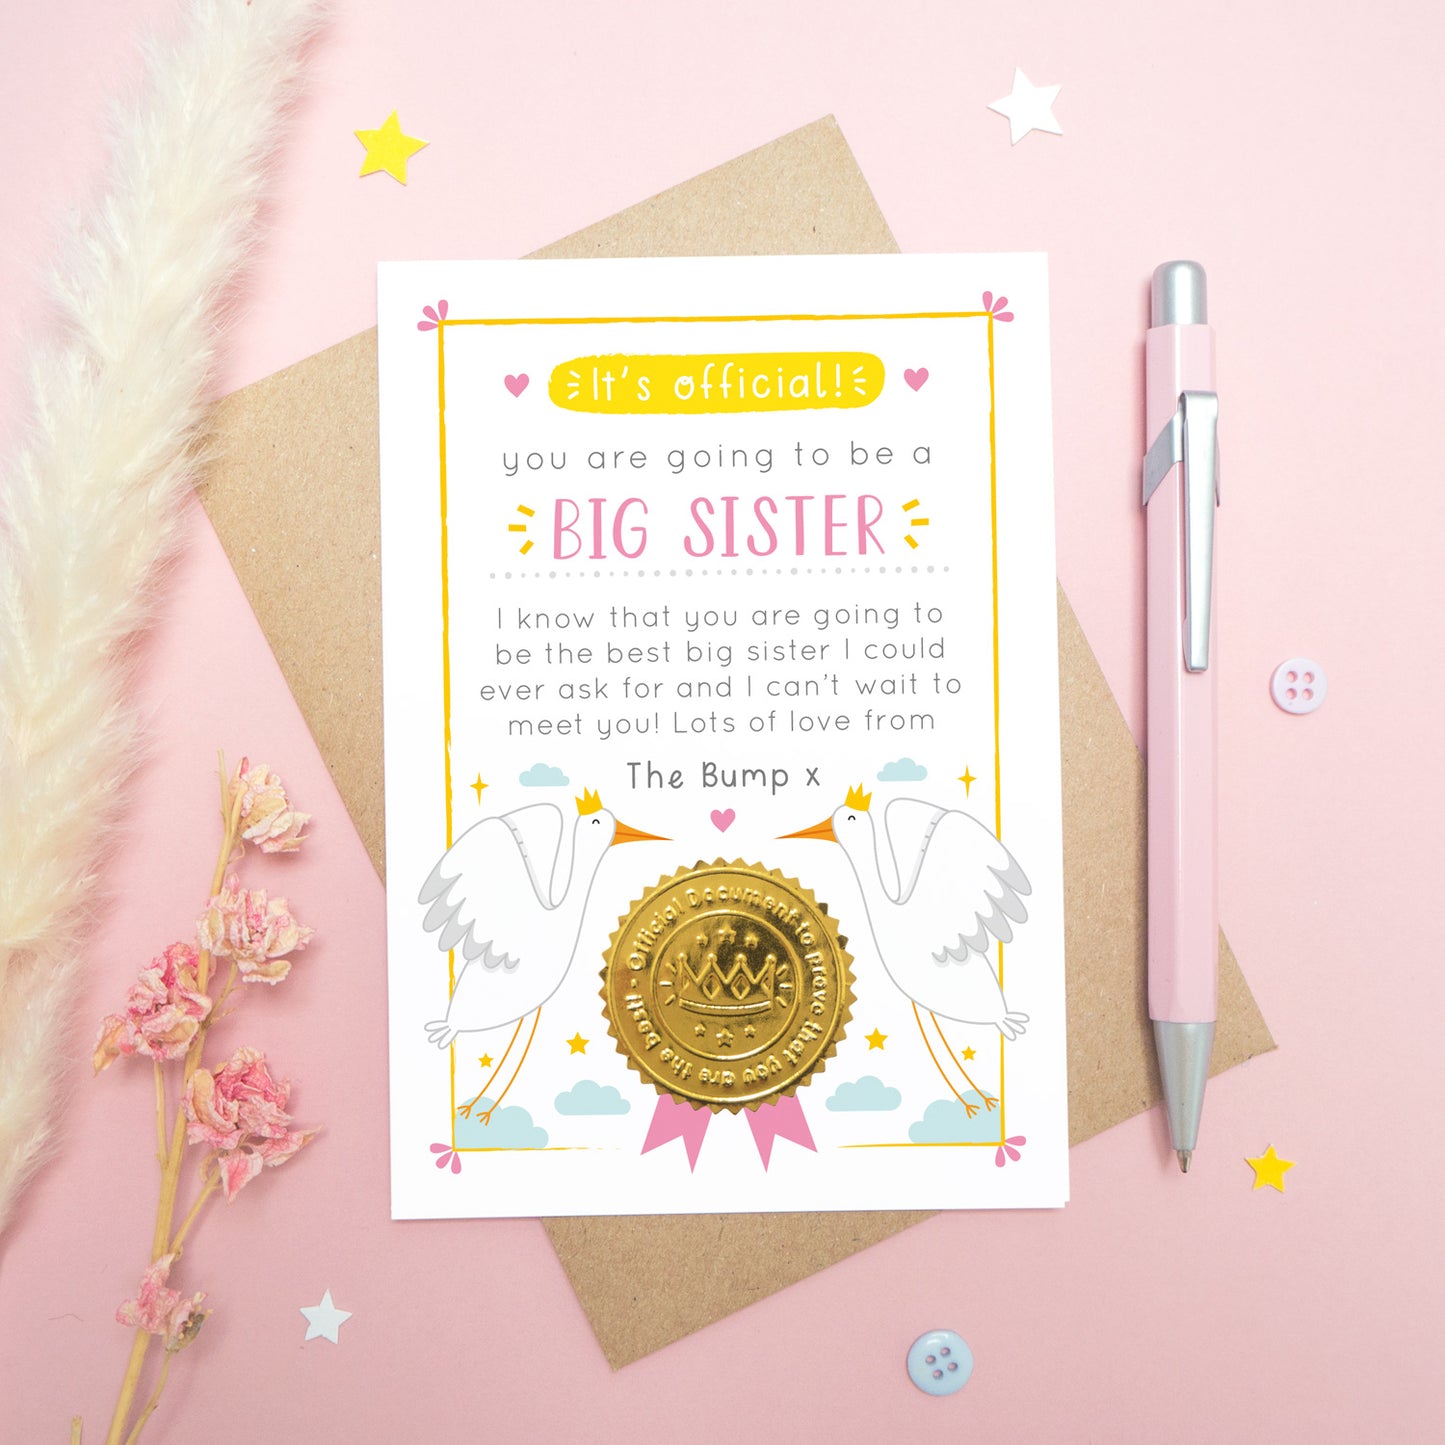 A big sister announcement card from the bump photographed on a pink background with dried flowers, a pen, buttons and stars.